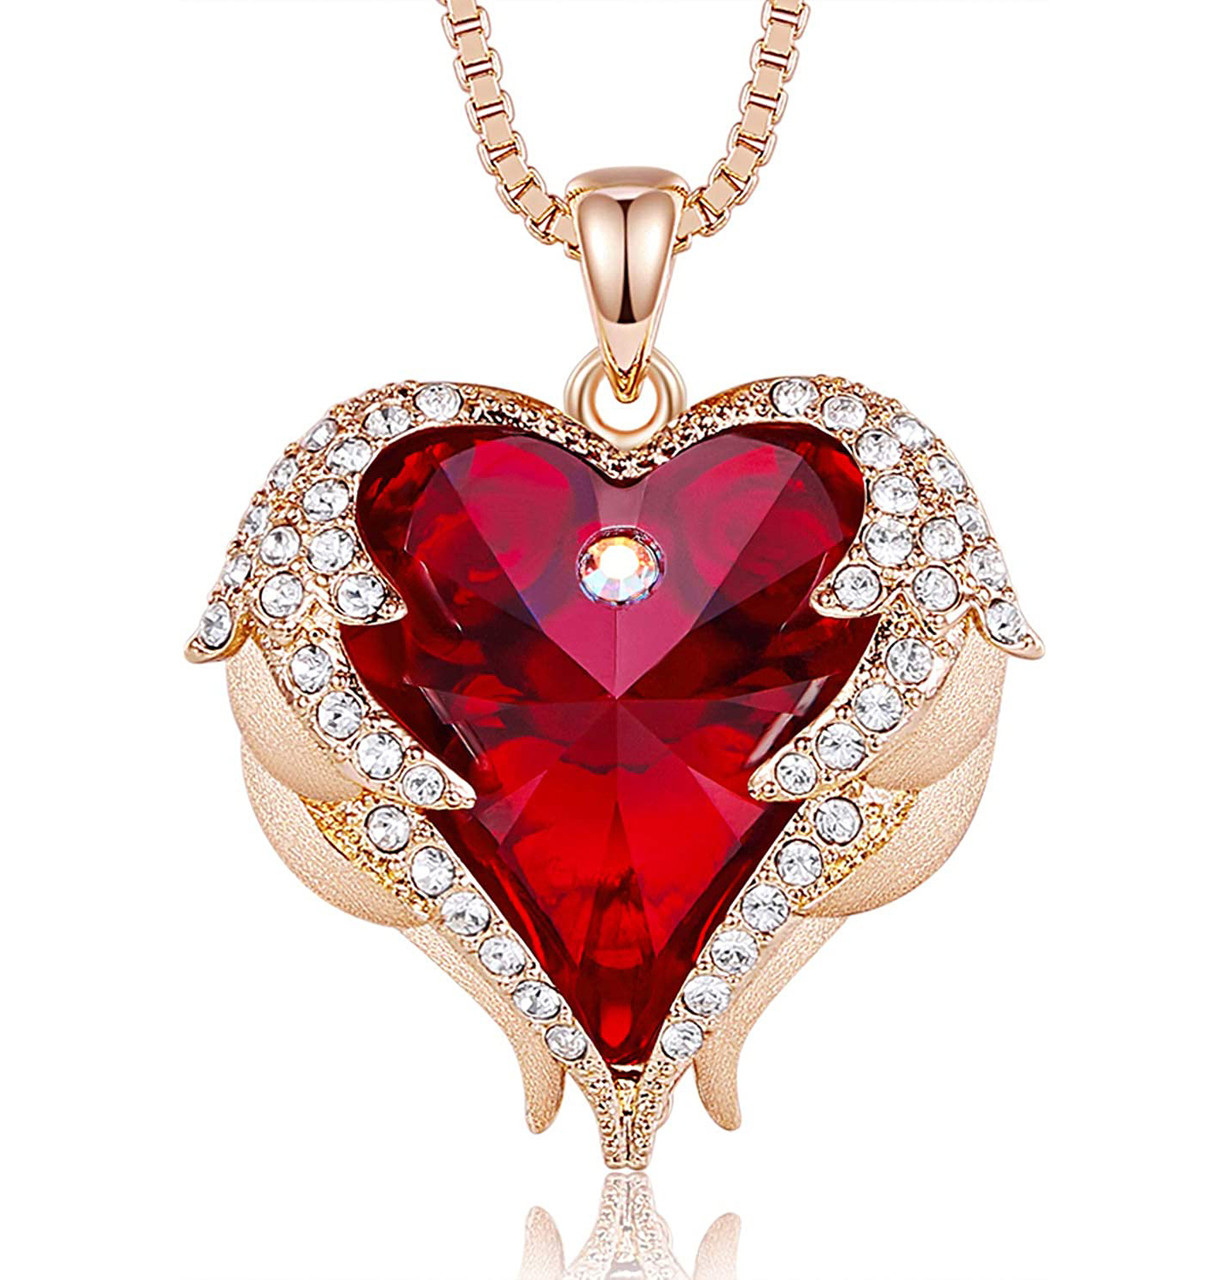 Angel Wings Heart Crystal Heart Red Pendant - (Rose Gold Tone)  with 18" Chain Necklace. Gift for Lover, Girl Friend, Wife, Valentine's Day Gift, Mother's Day, Anniversary Gift Necklace.